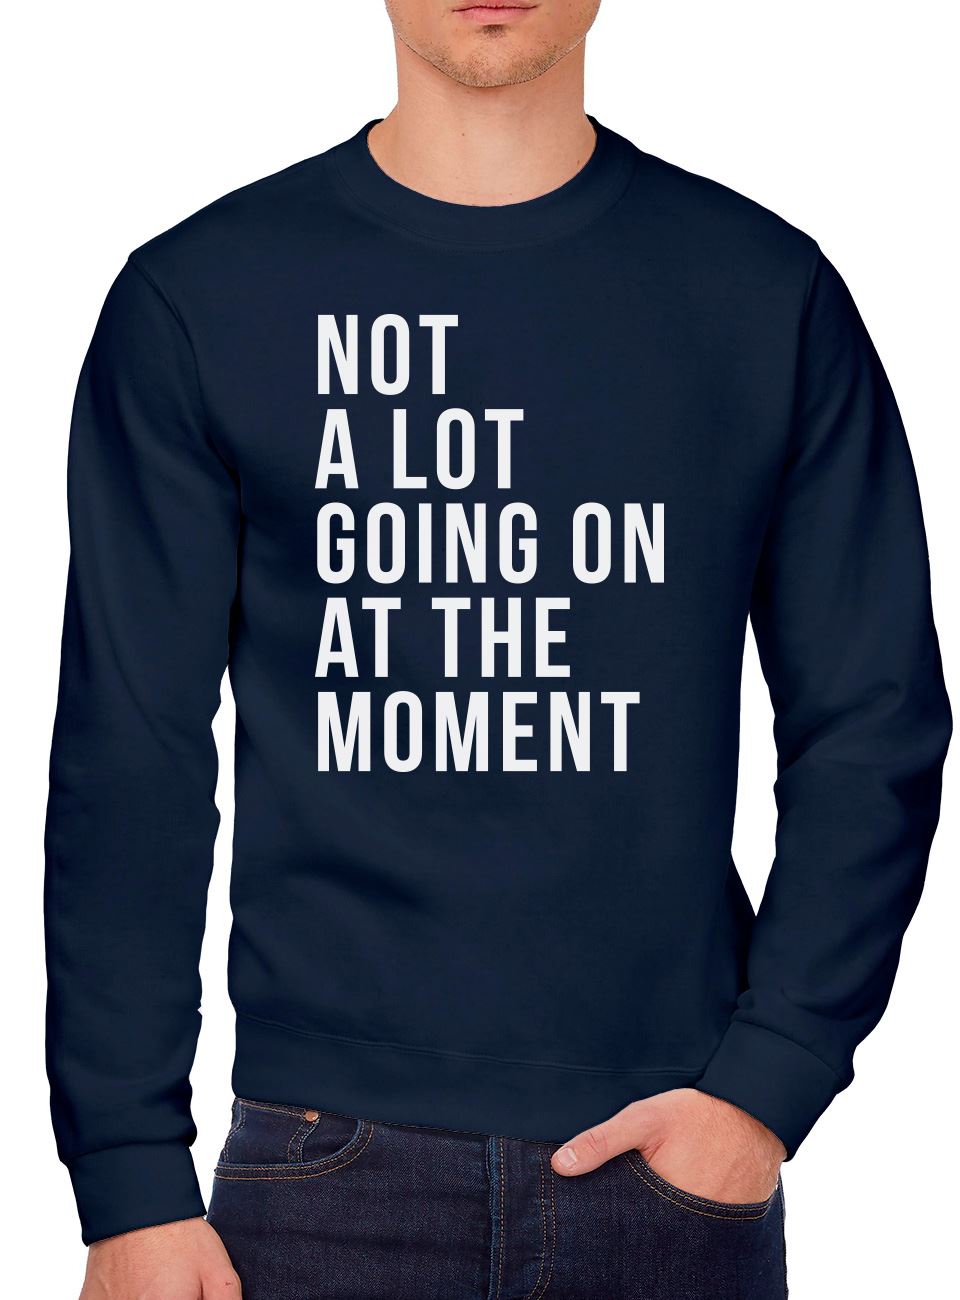 Not A Lot Going On at The Moment - Youth & Mens Sweatshirt